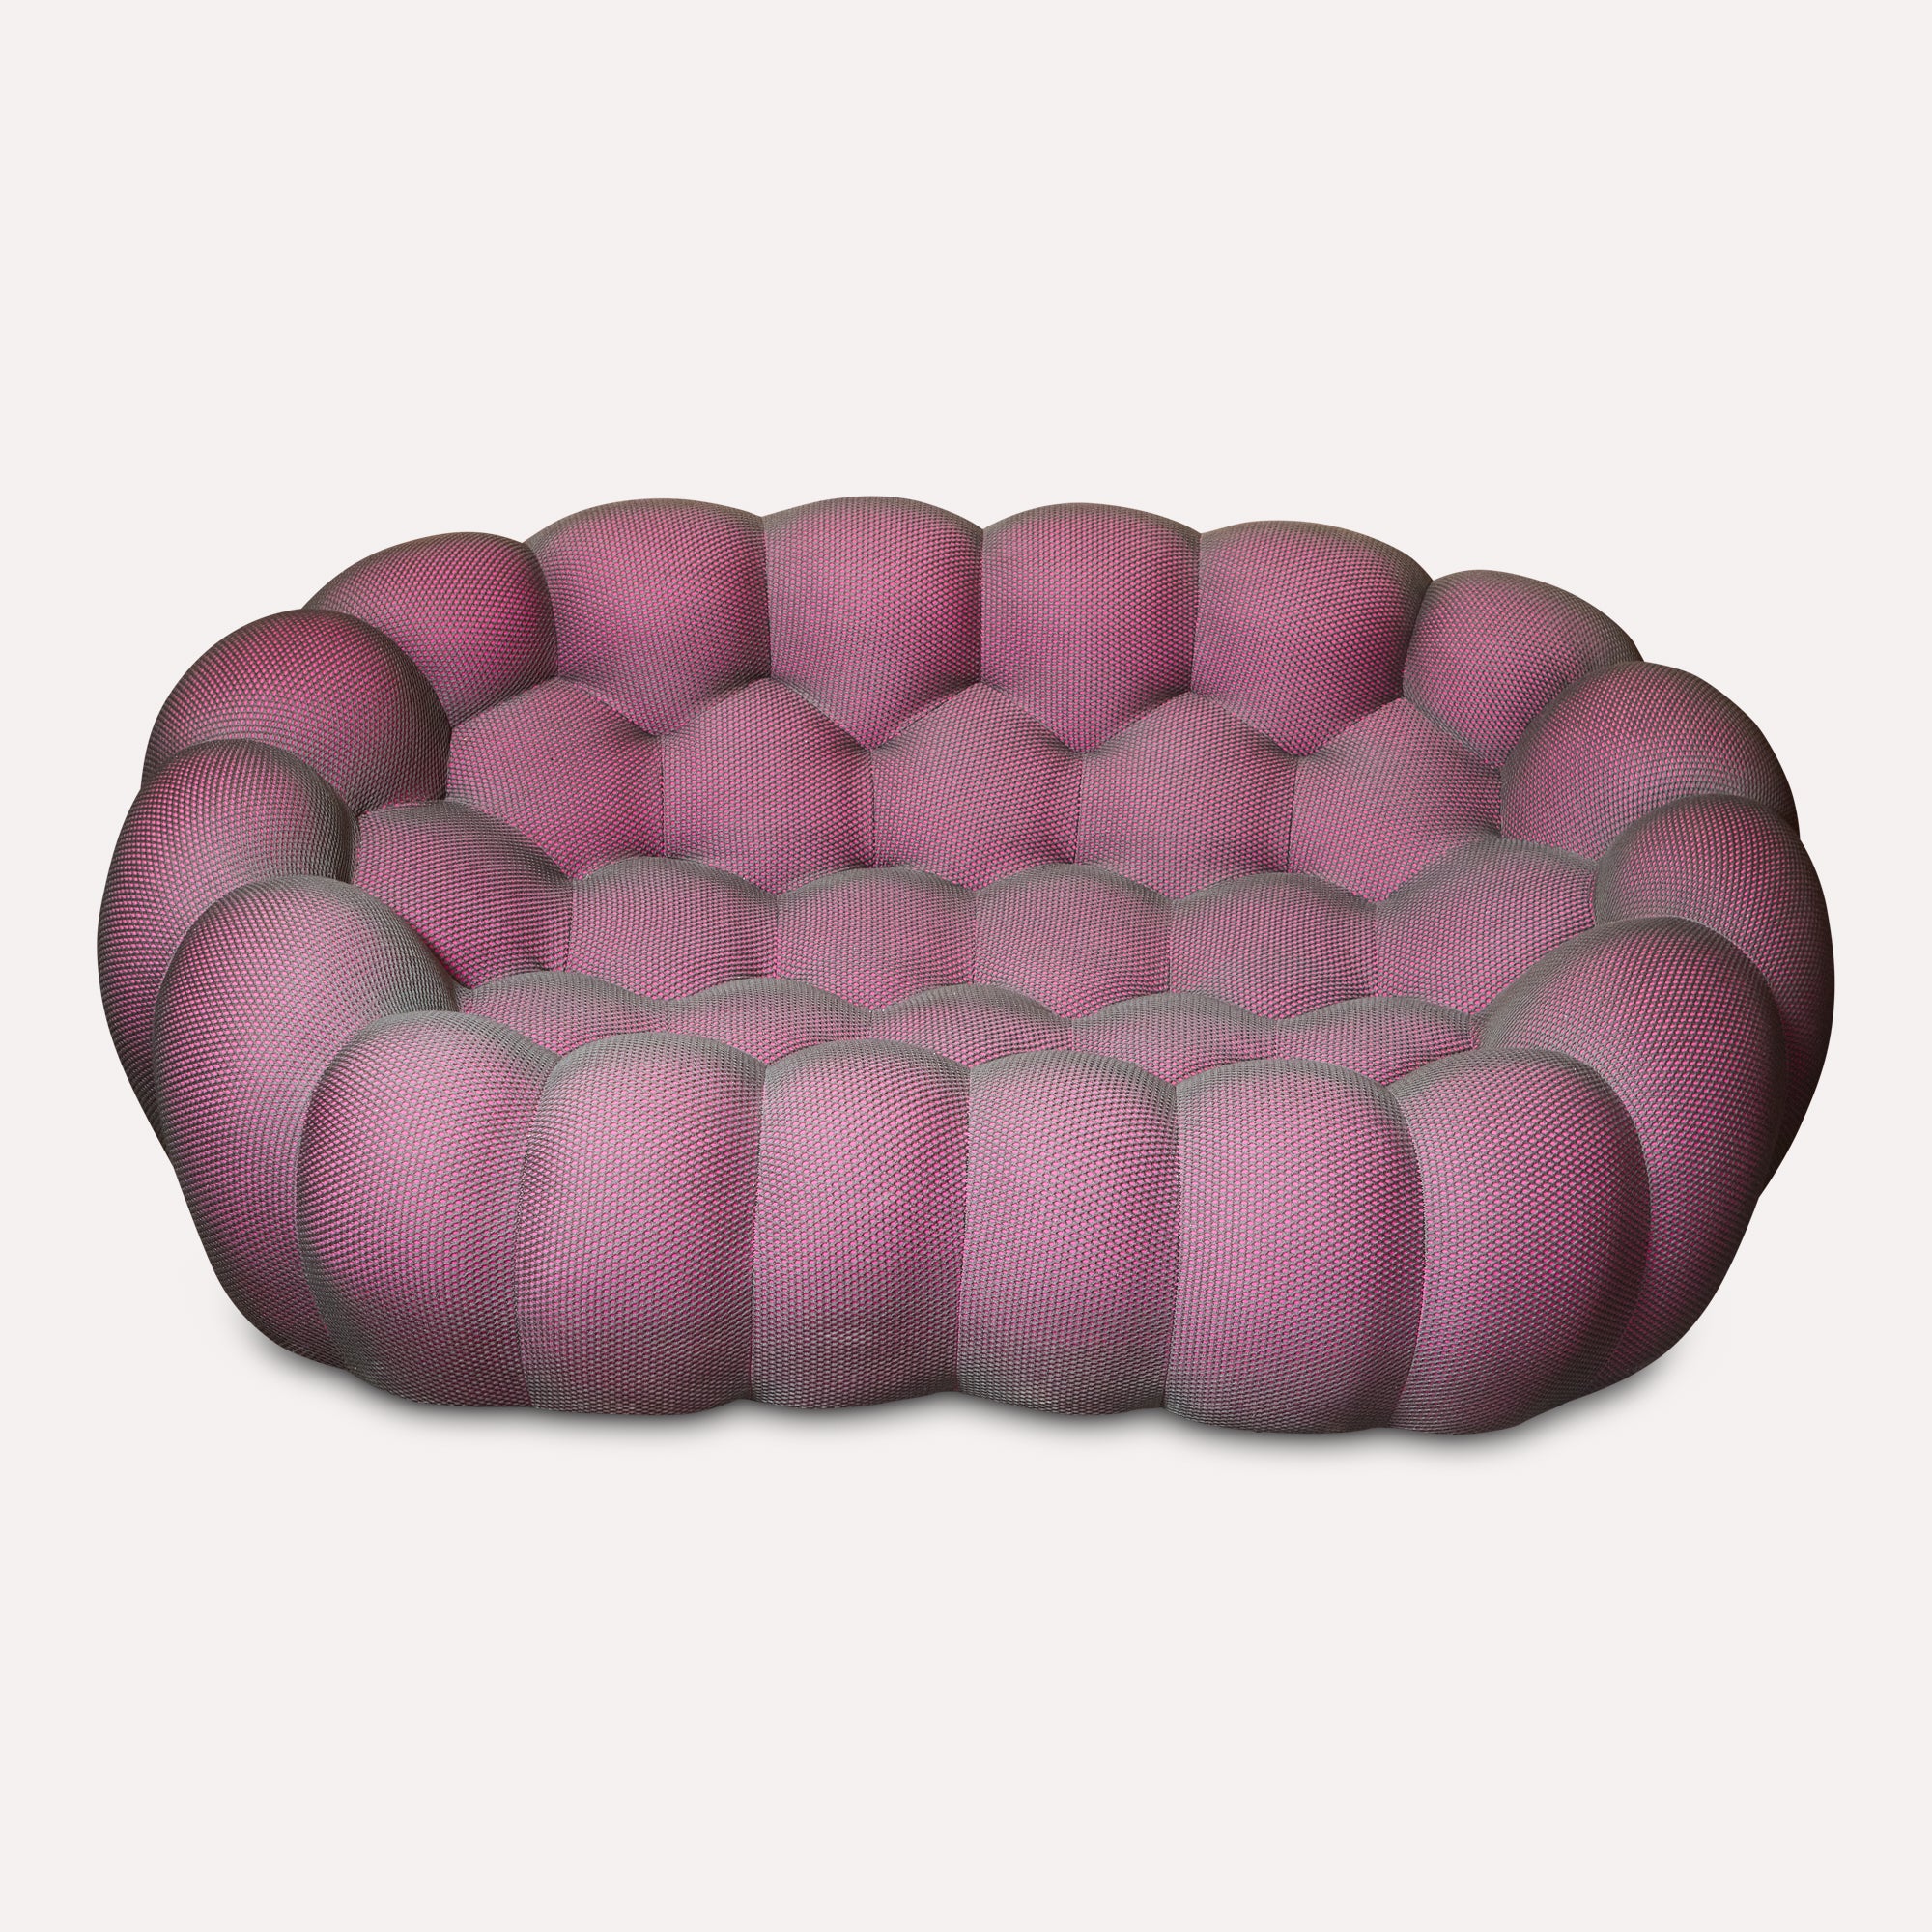 Sofa | In the Bubble style